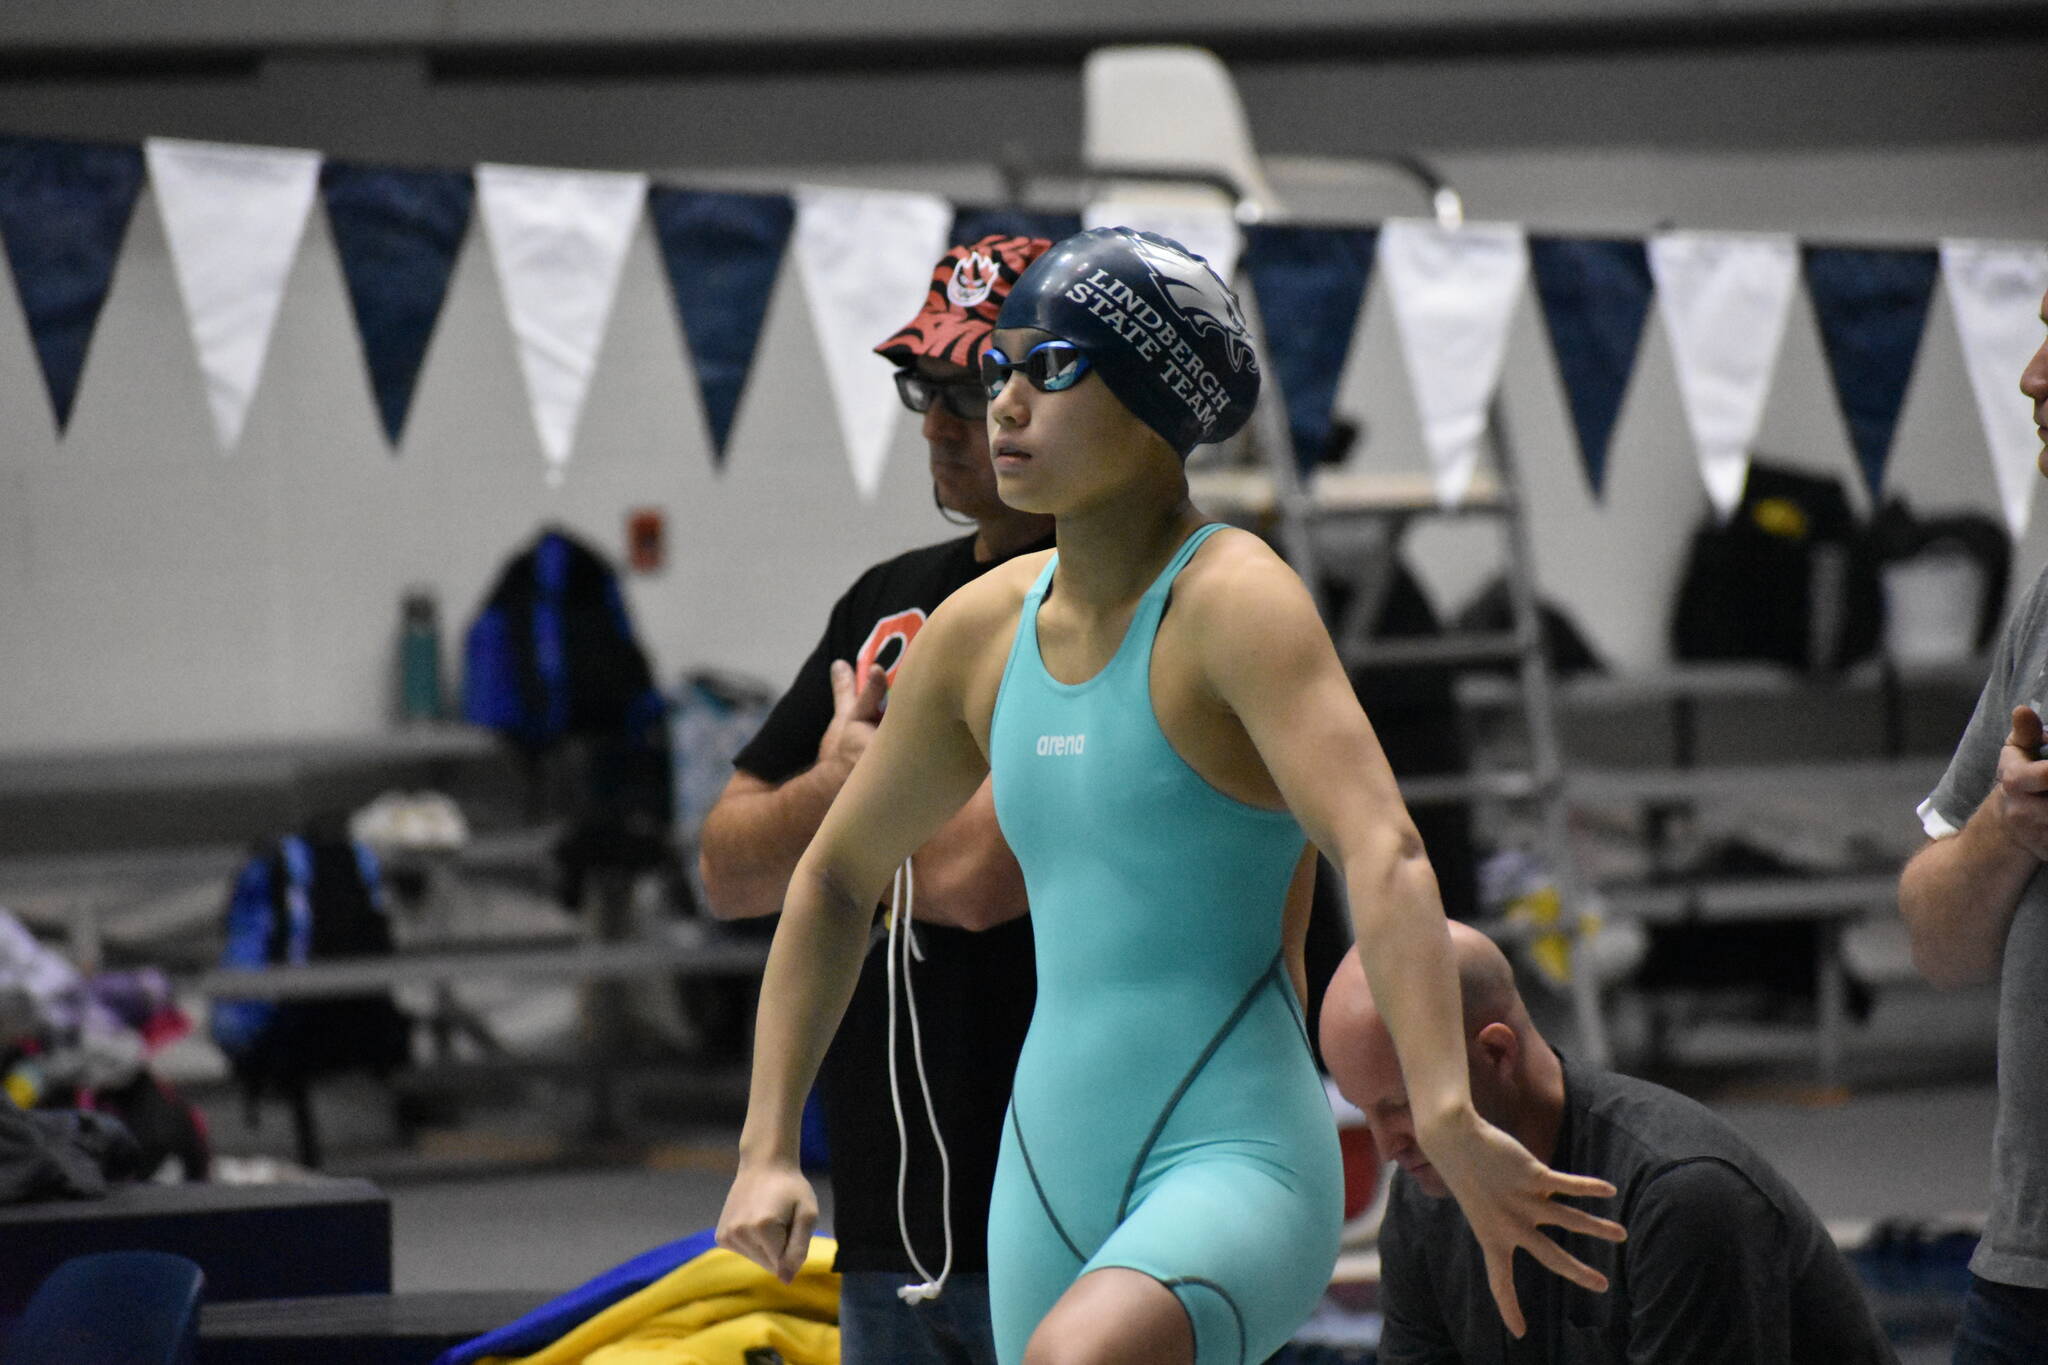 Senior Caelee Truong preparing for her 50-yard freestyle final race. Ben Ray/Sound Publishing